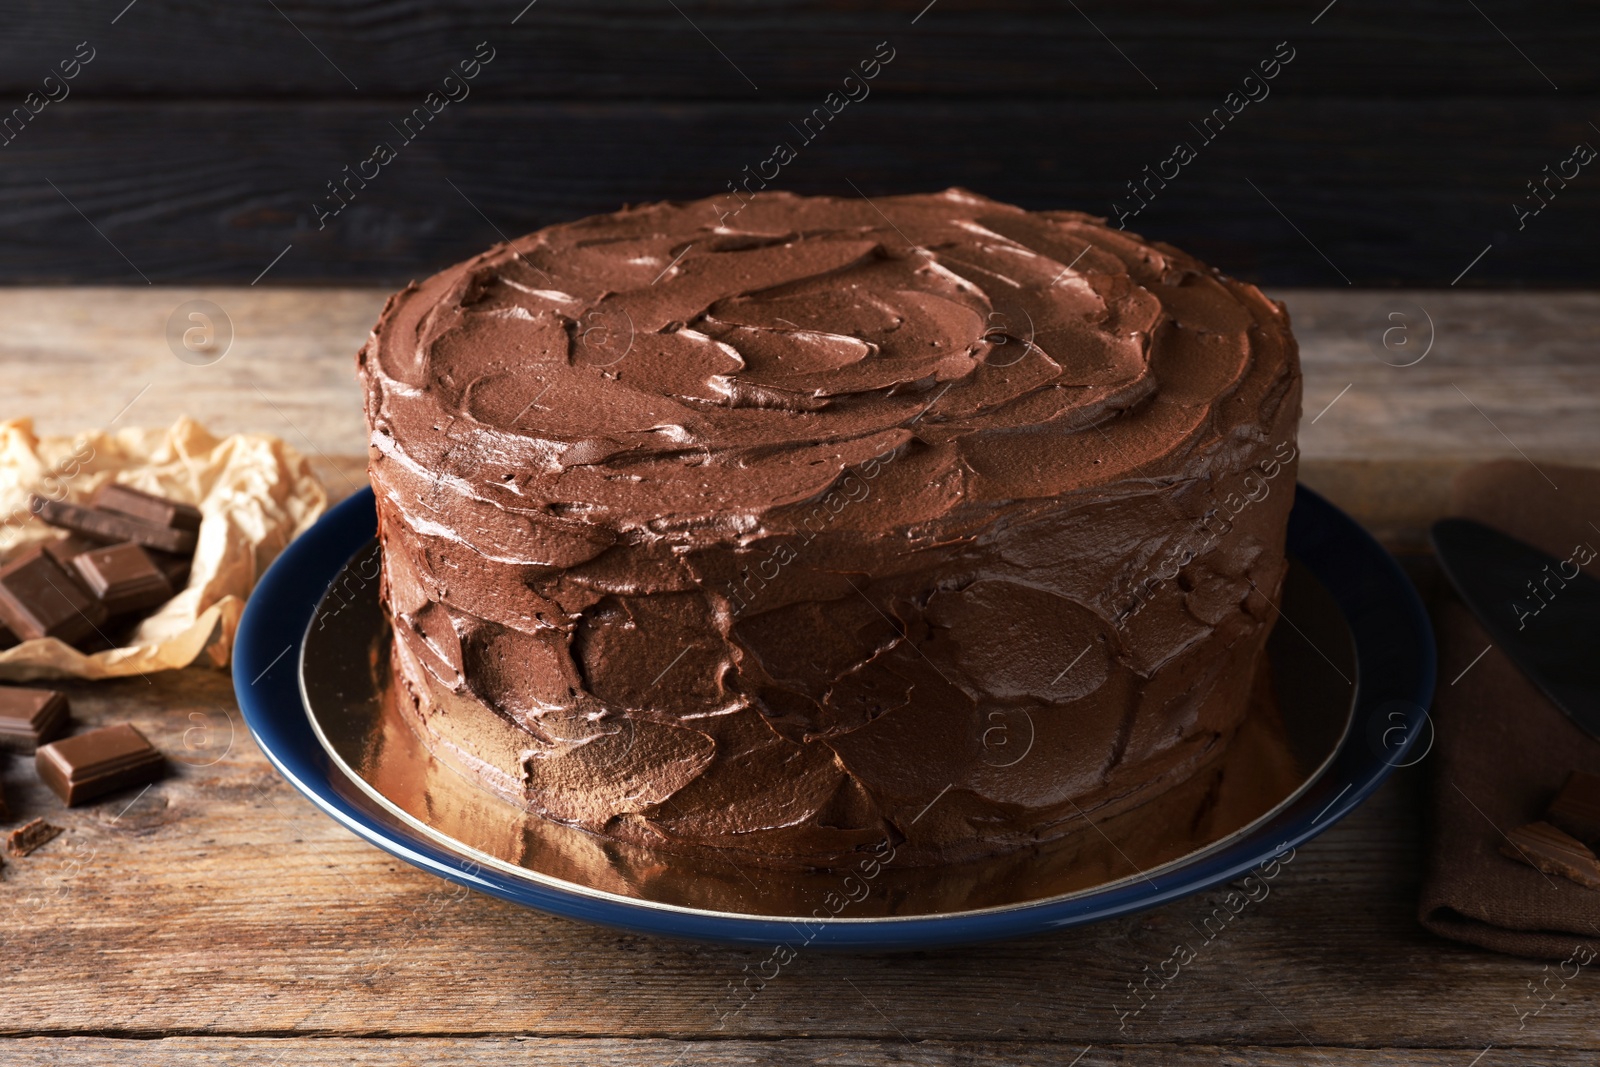 Photo of Plate with tasty homemade chocolate cake on wooden table